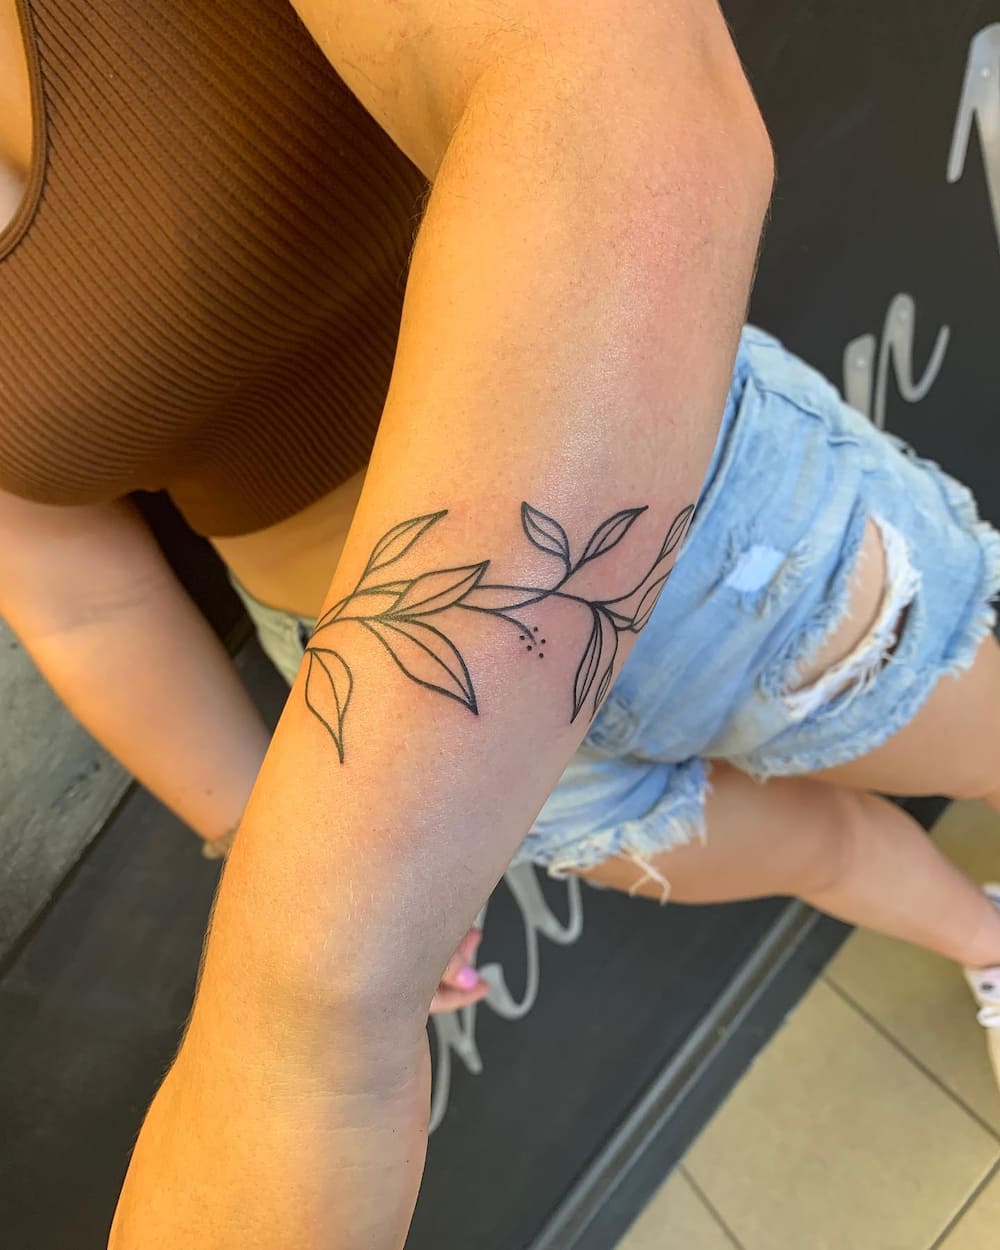 An simple tattoo of vines and leaves on a woman's forearm